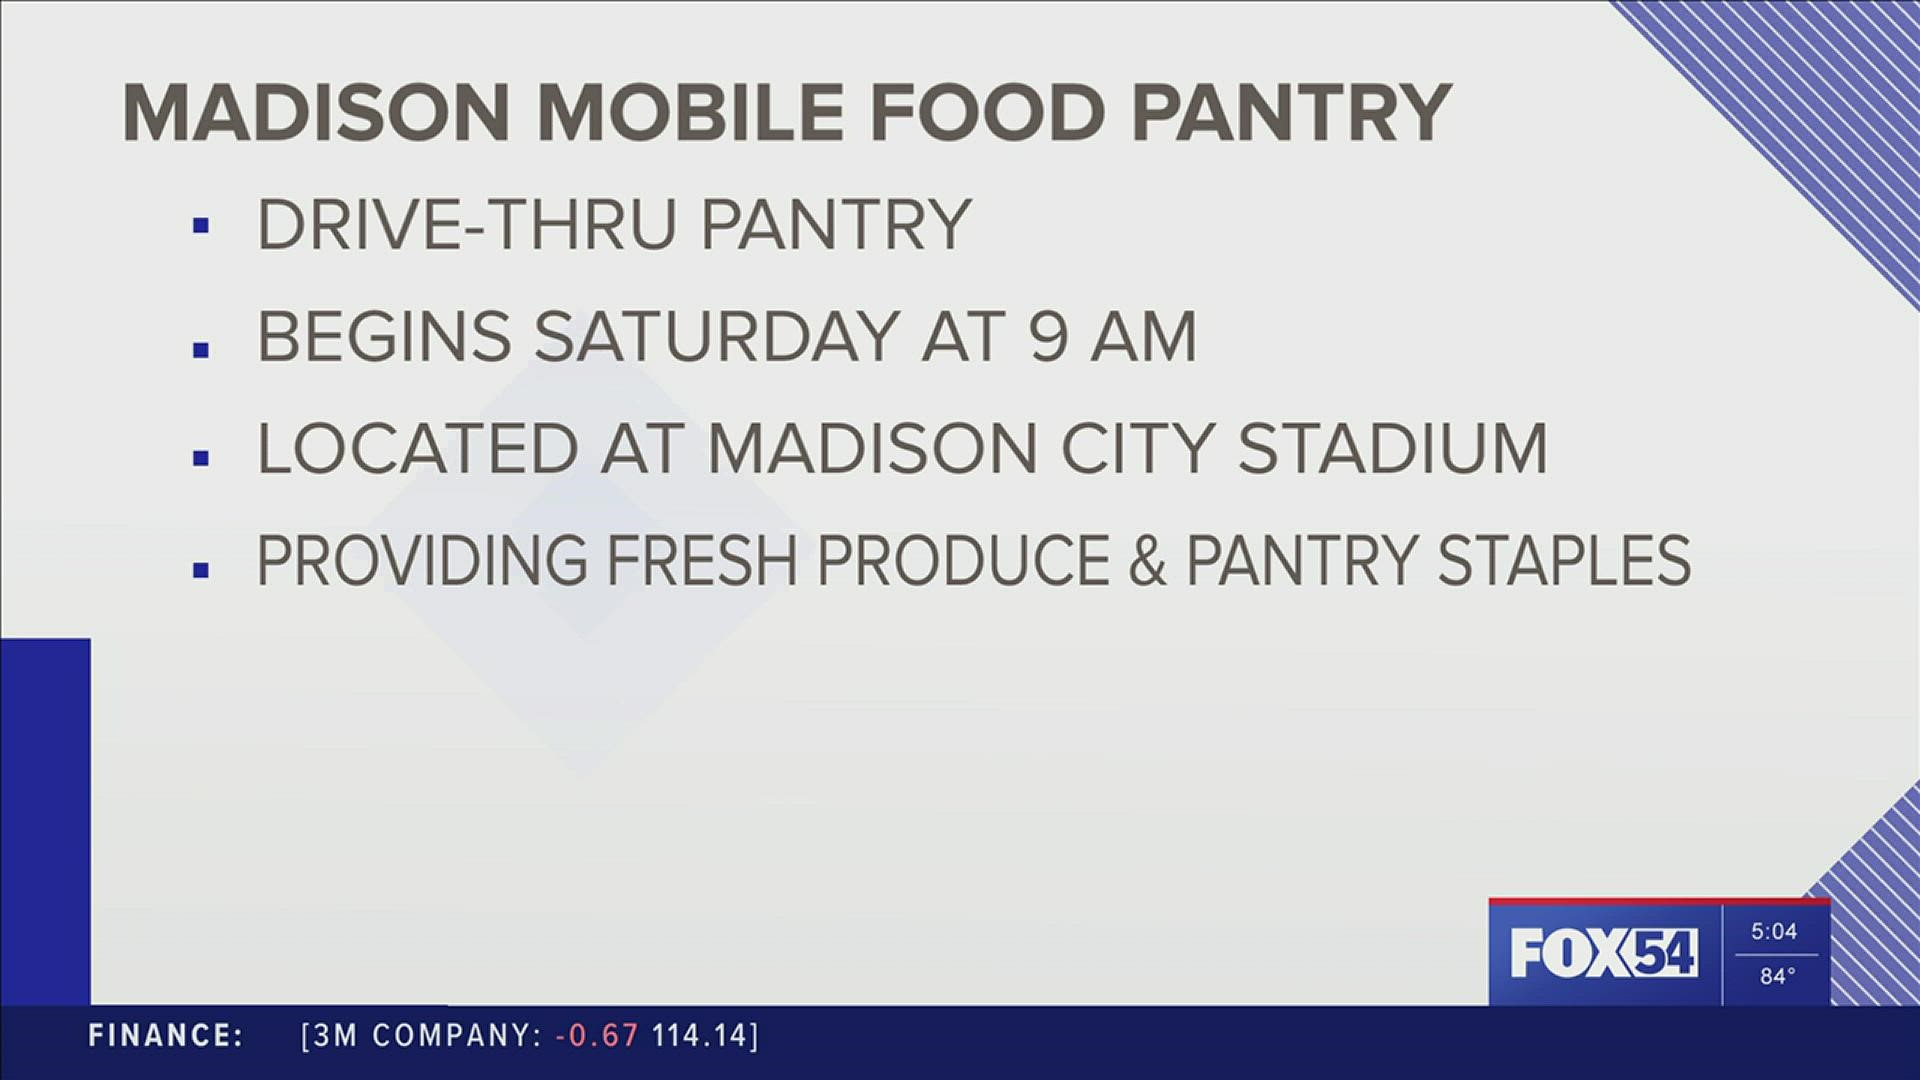 The organization will provide free fresh produce and others essentials in a drive-thru giveaway.